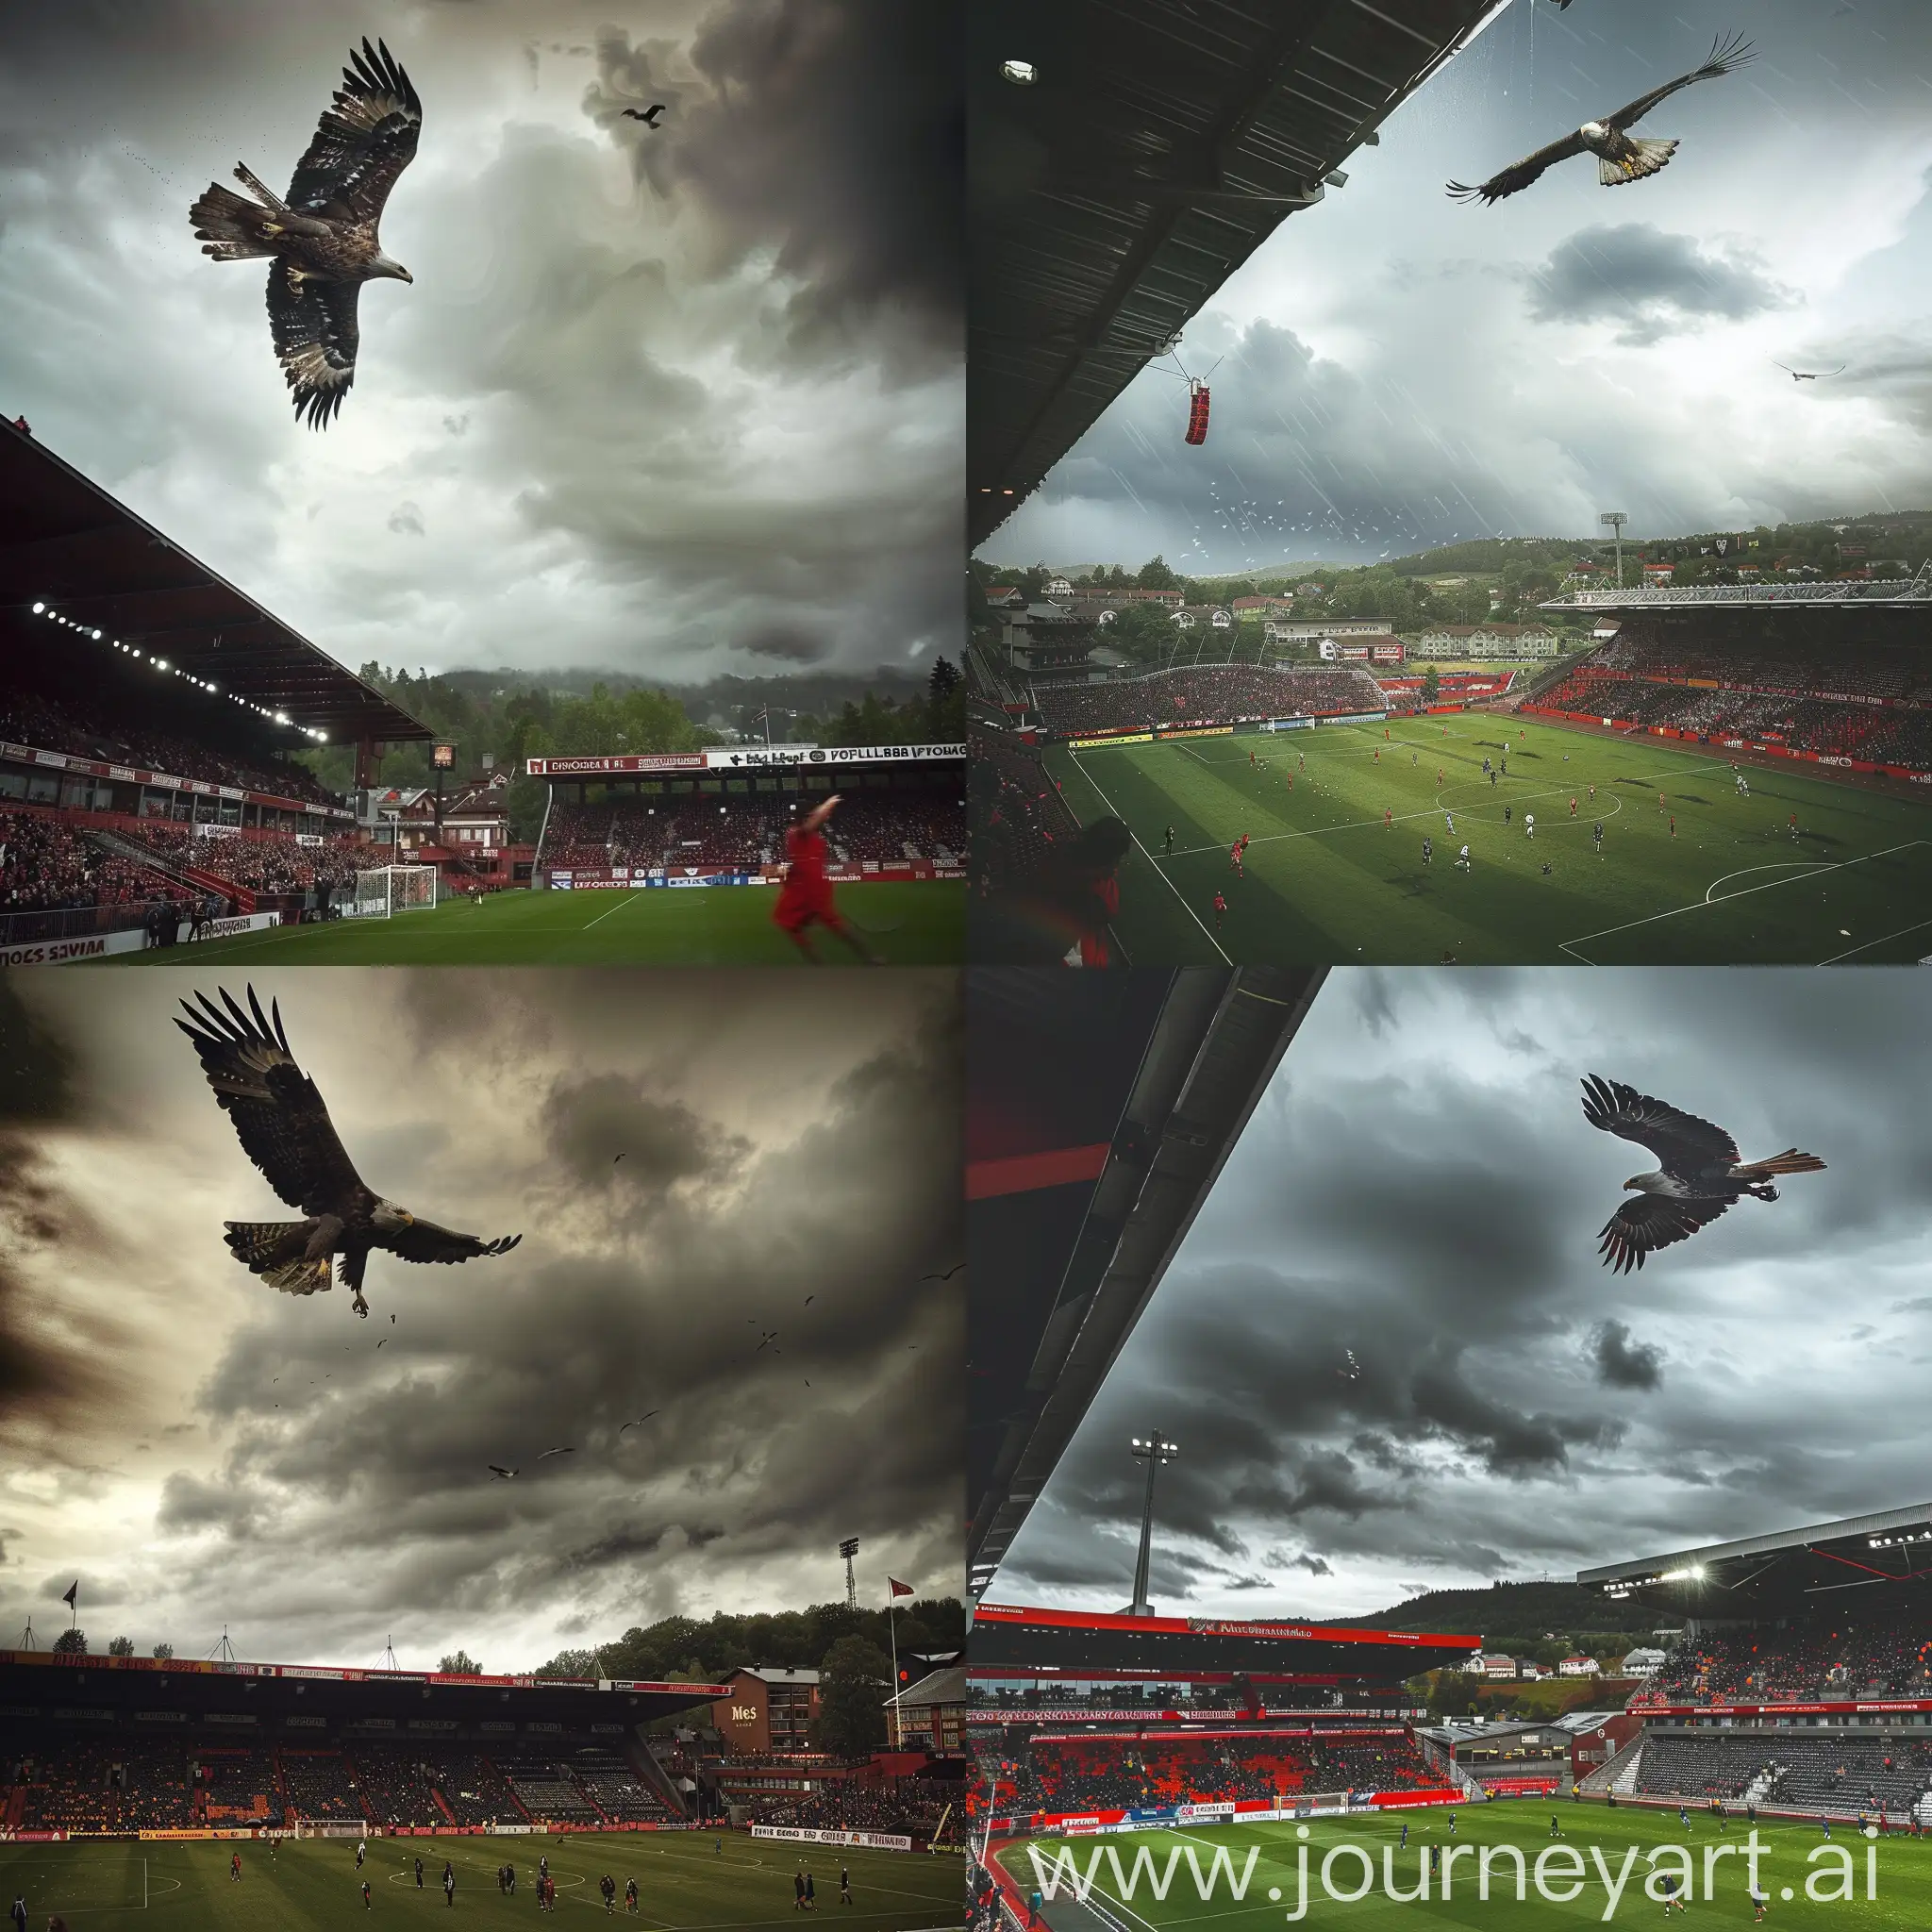 Eagle flying over Melløs Stadion. This is a football arena for Moss Fotballklubb, a proffessional footballklubb in Norway. There is a match going on and the arena is full of people. The weather is cloudy with rain and dark clouds. 